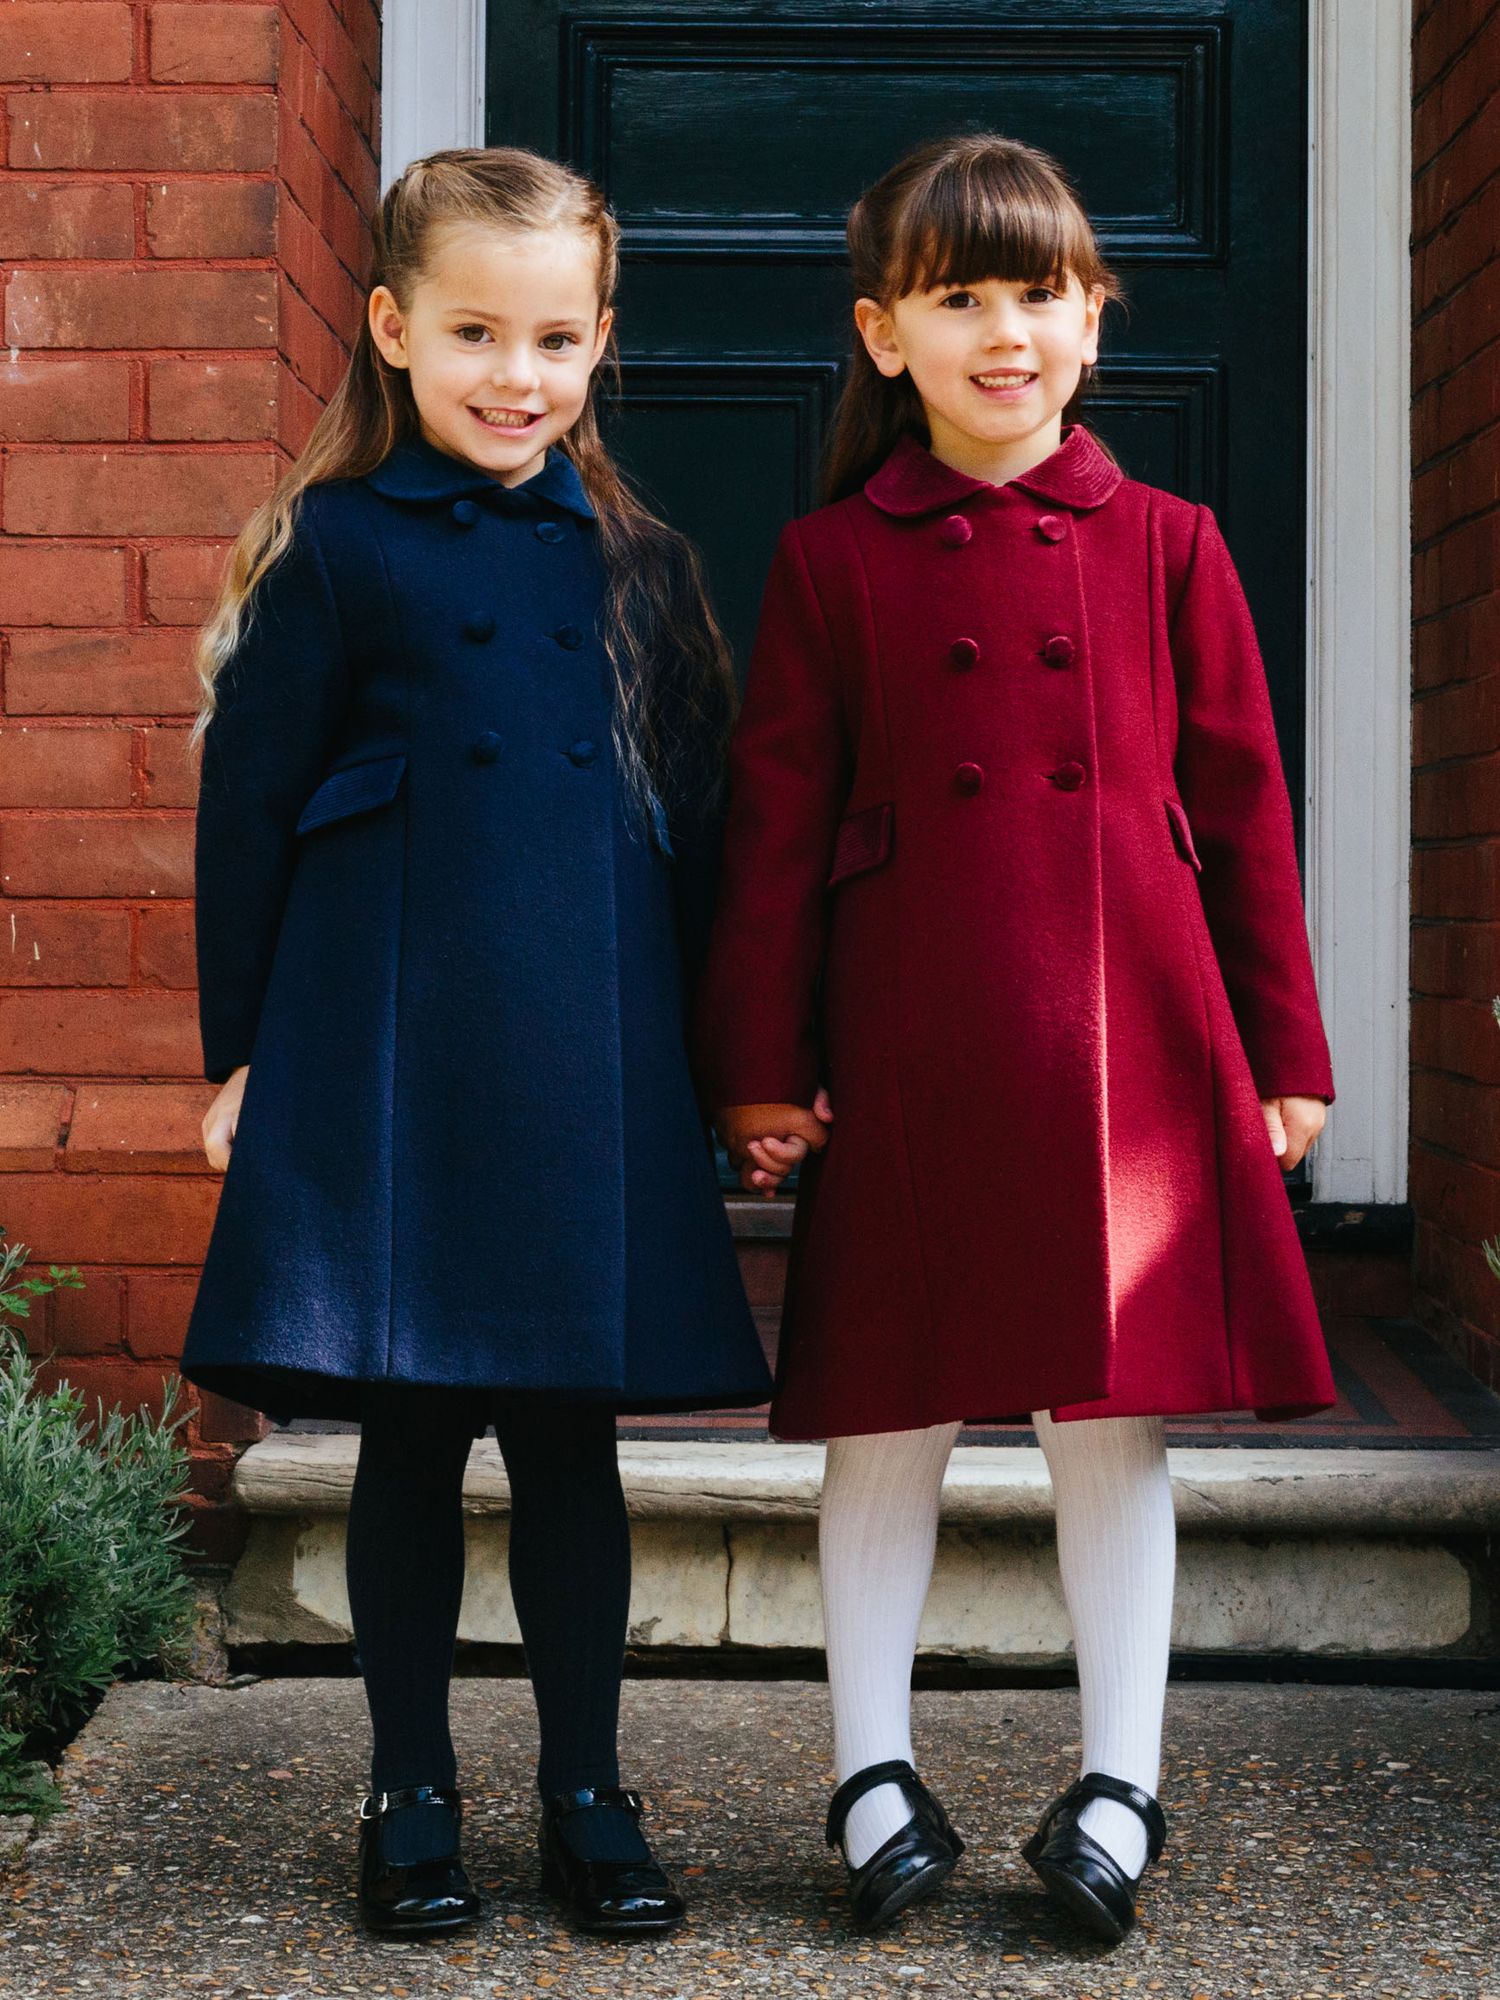 Trotters Kids' Classic Double Breasted Coat, Burgundy